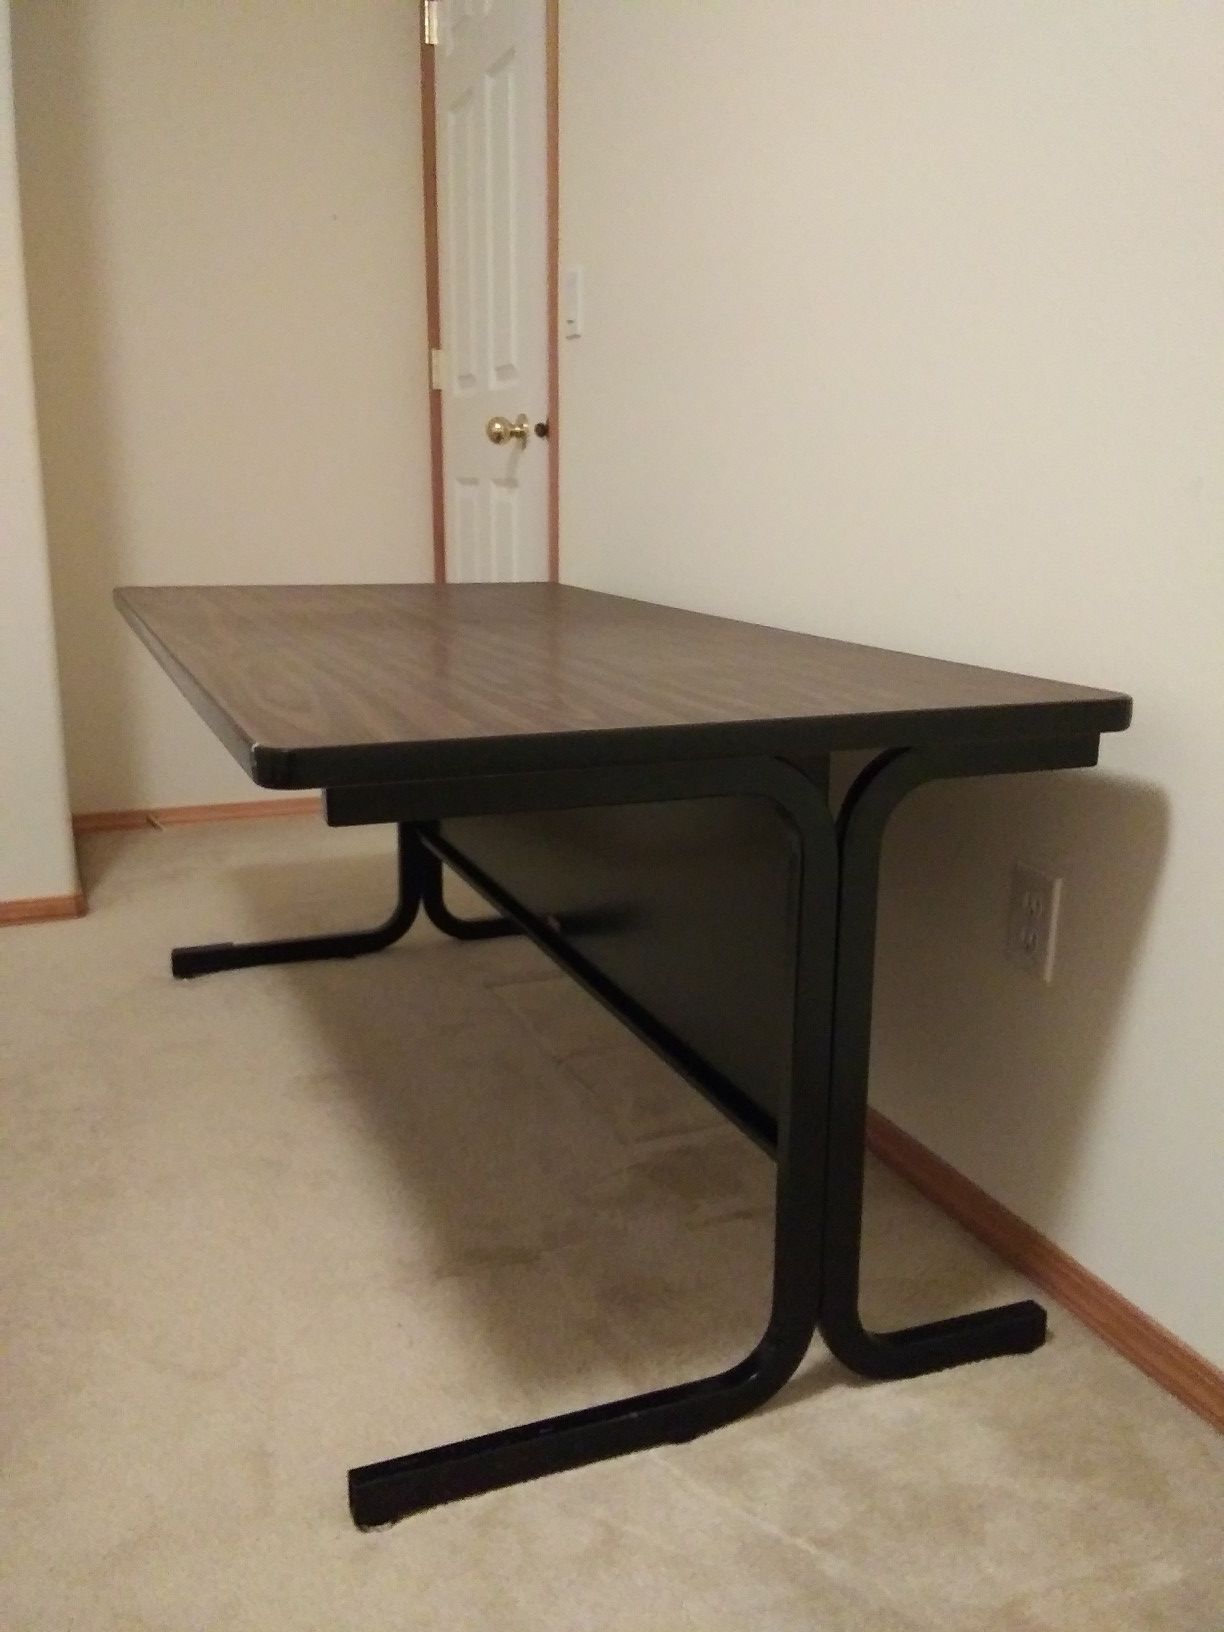 Office desk or craft table